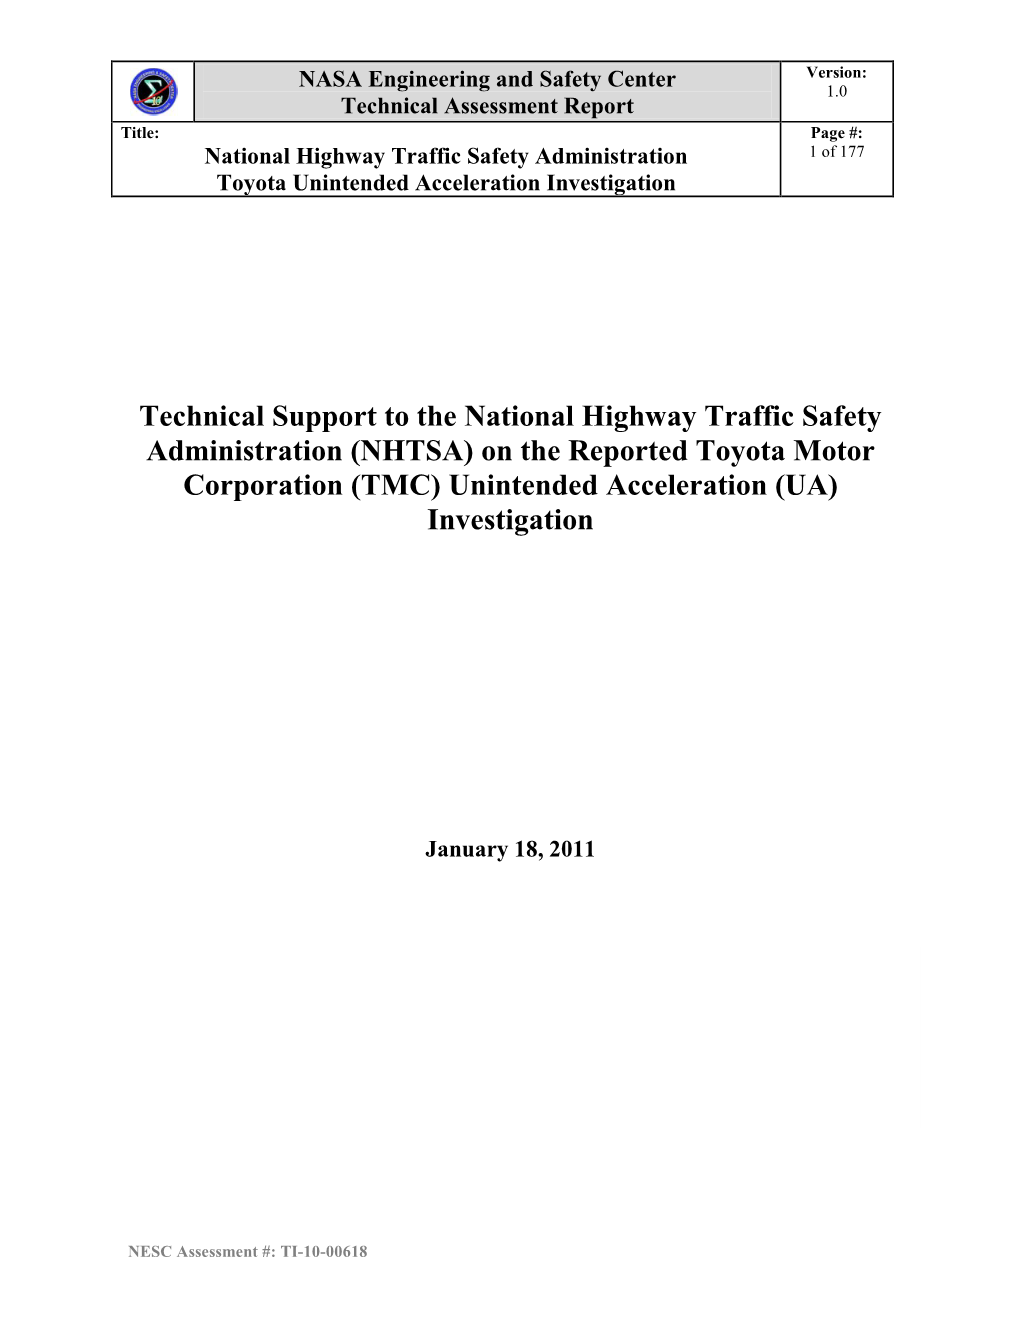 NASA Engineering and Safety Center Technical Assessment Report